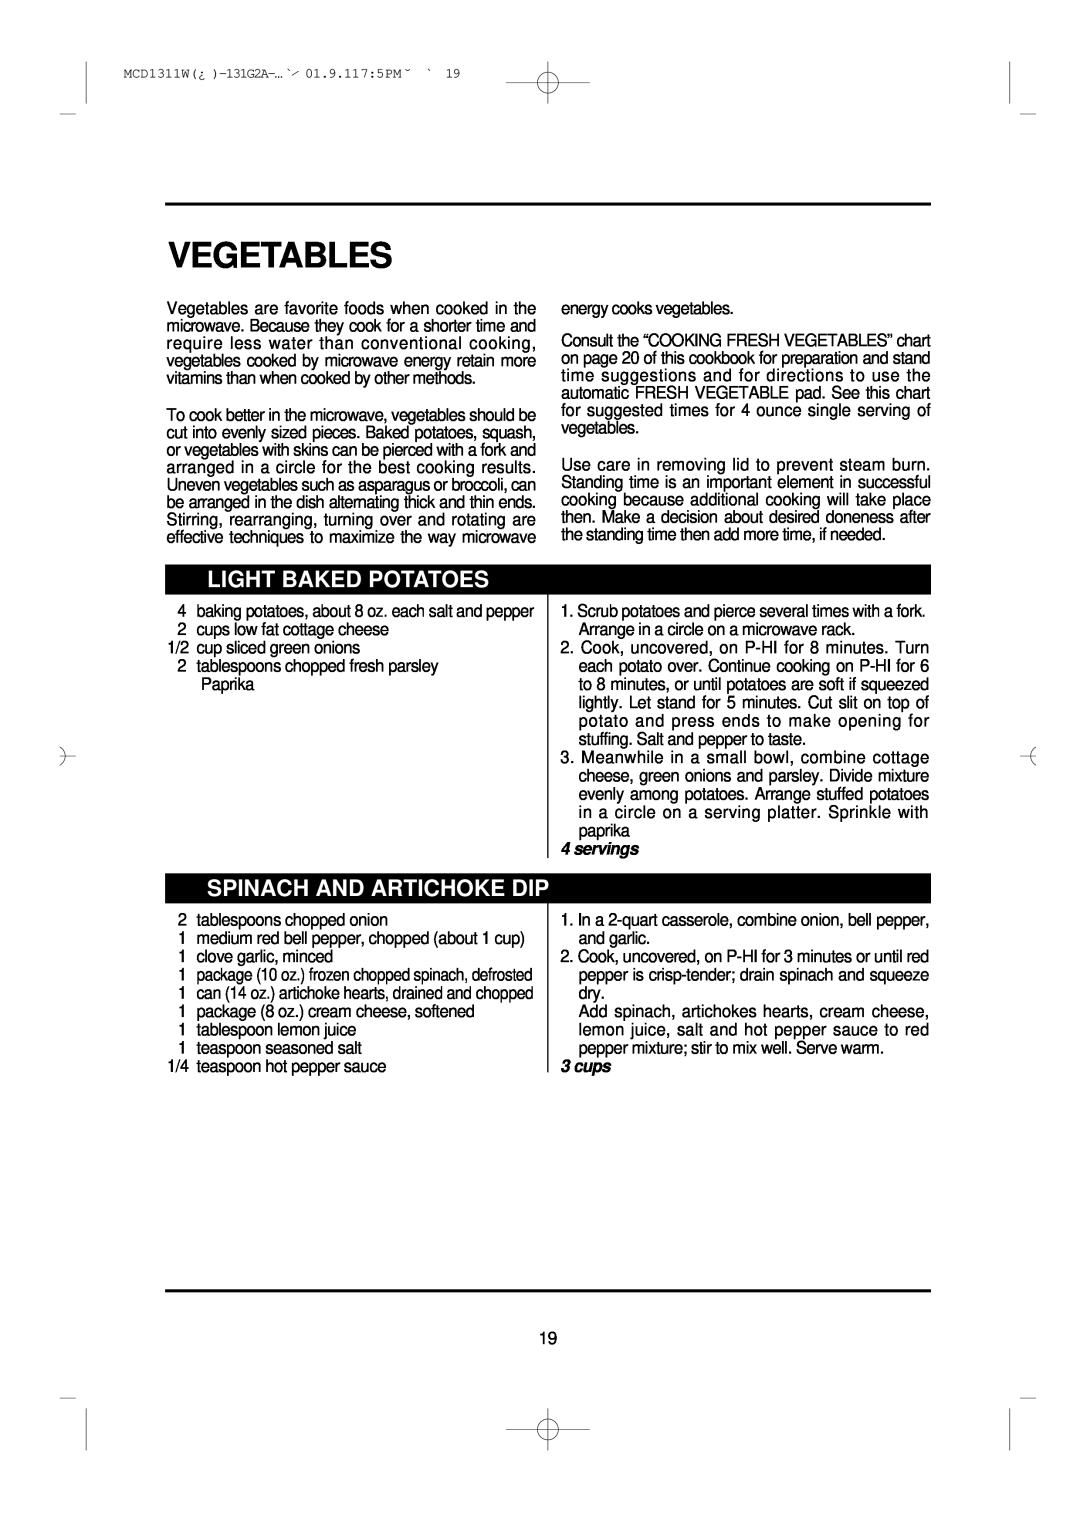 Magic Chef MCD1311W instruction manual Vegetables, Light Baked Potatoes, Spinach And Artichoke Dip, cups, servings 